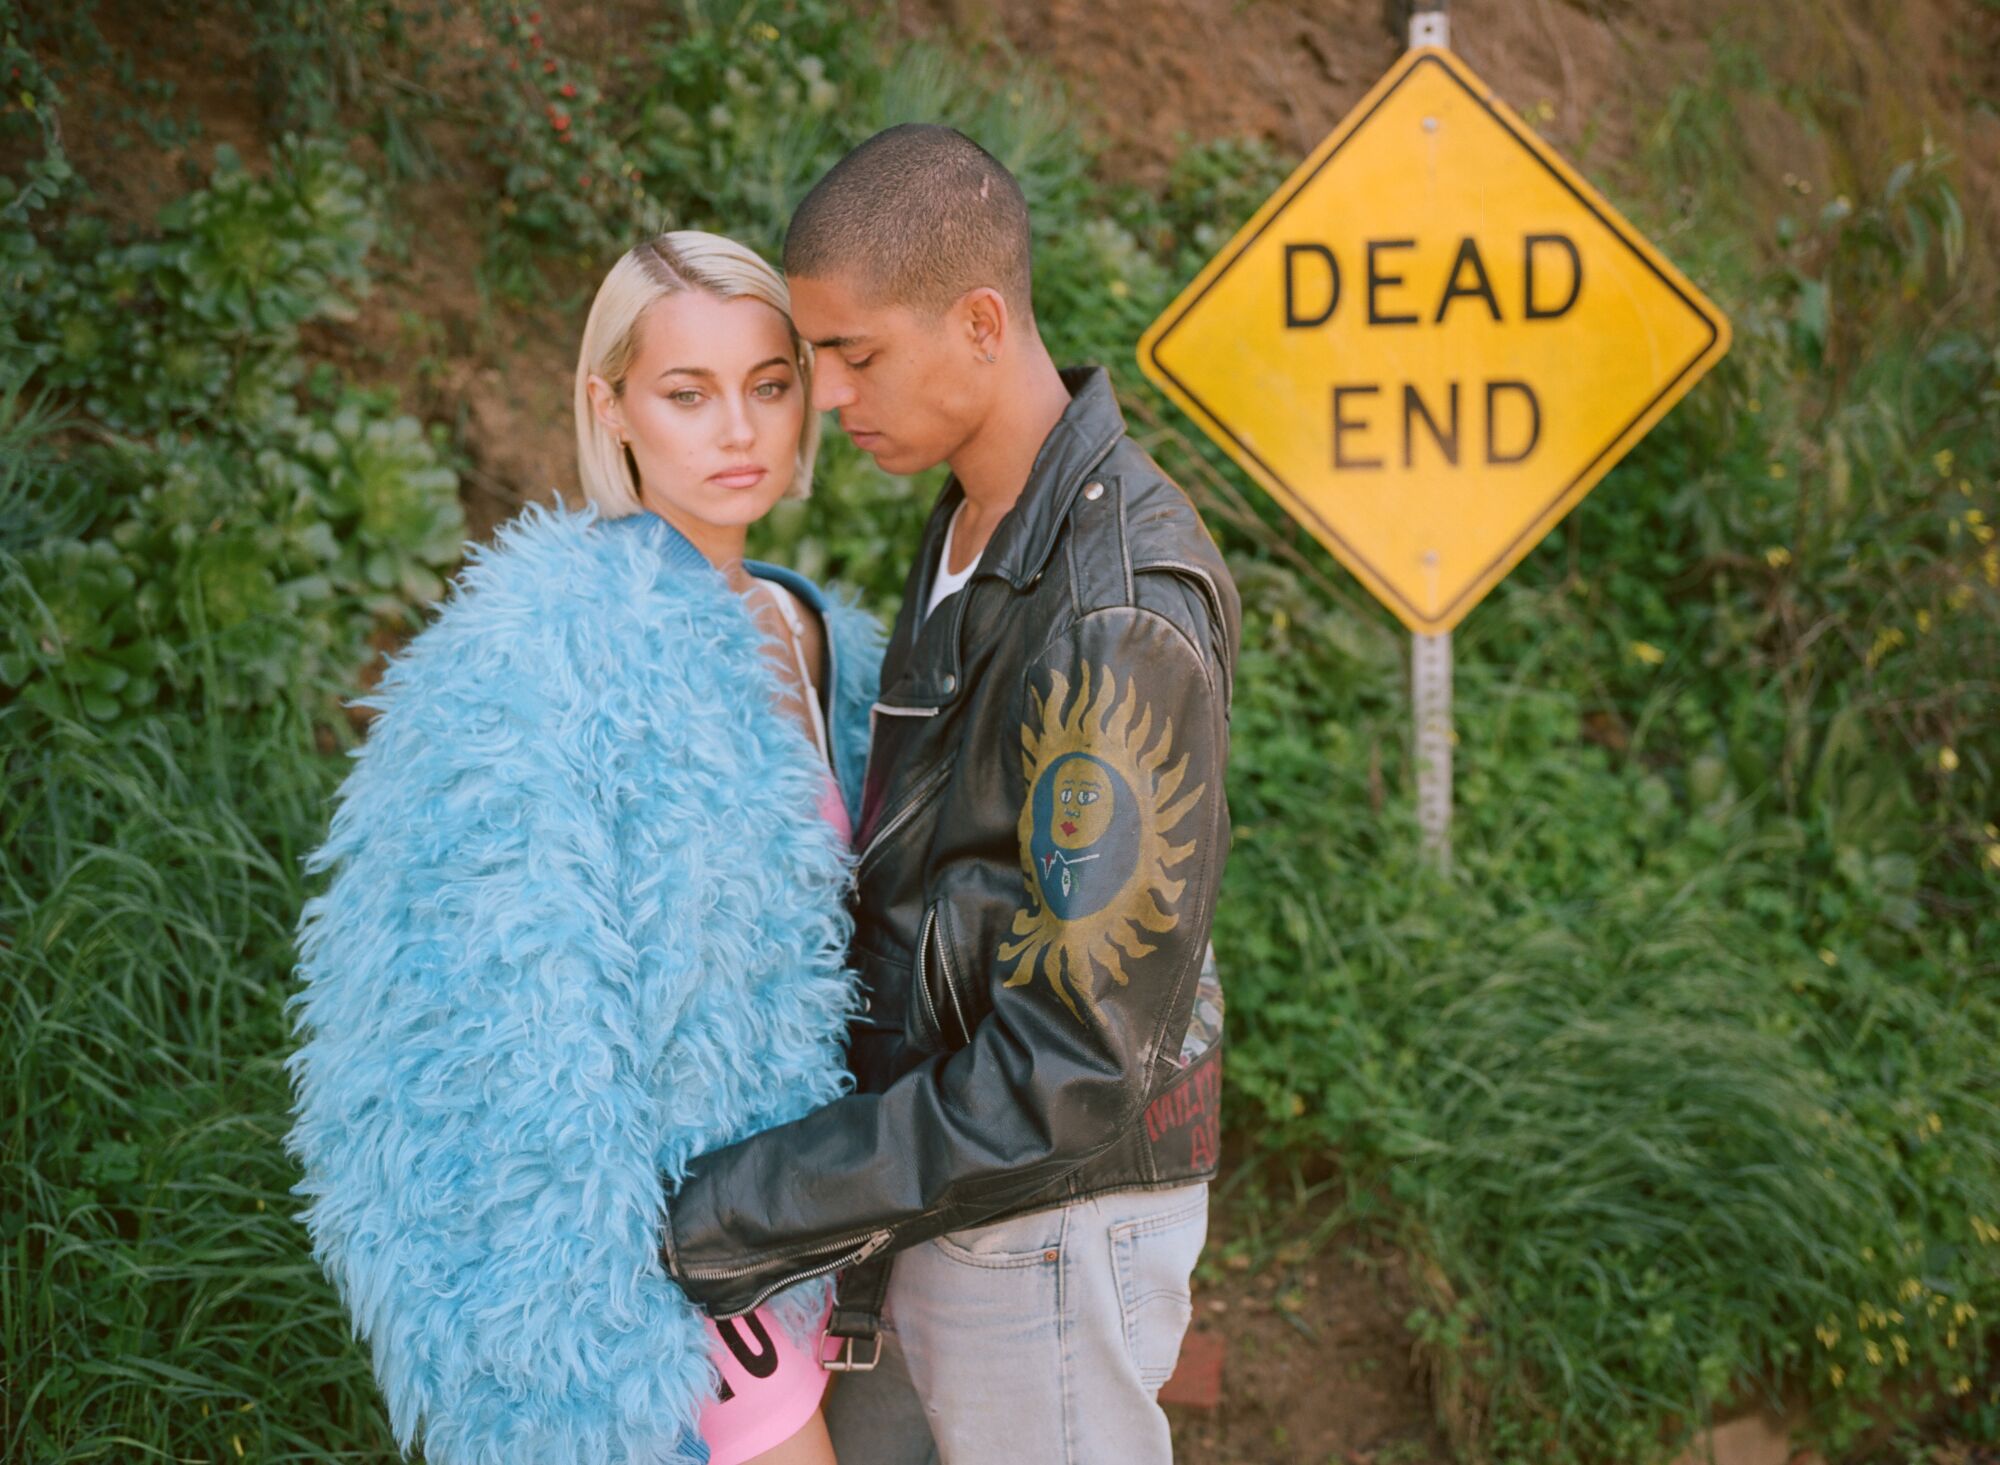 A couple embraces in front of a "Dead End" sign.